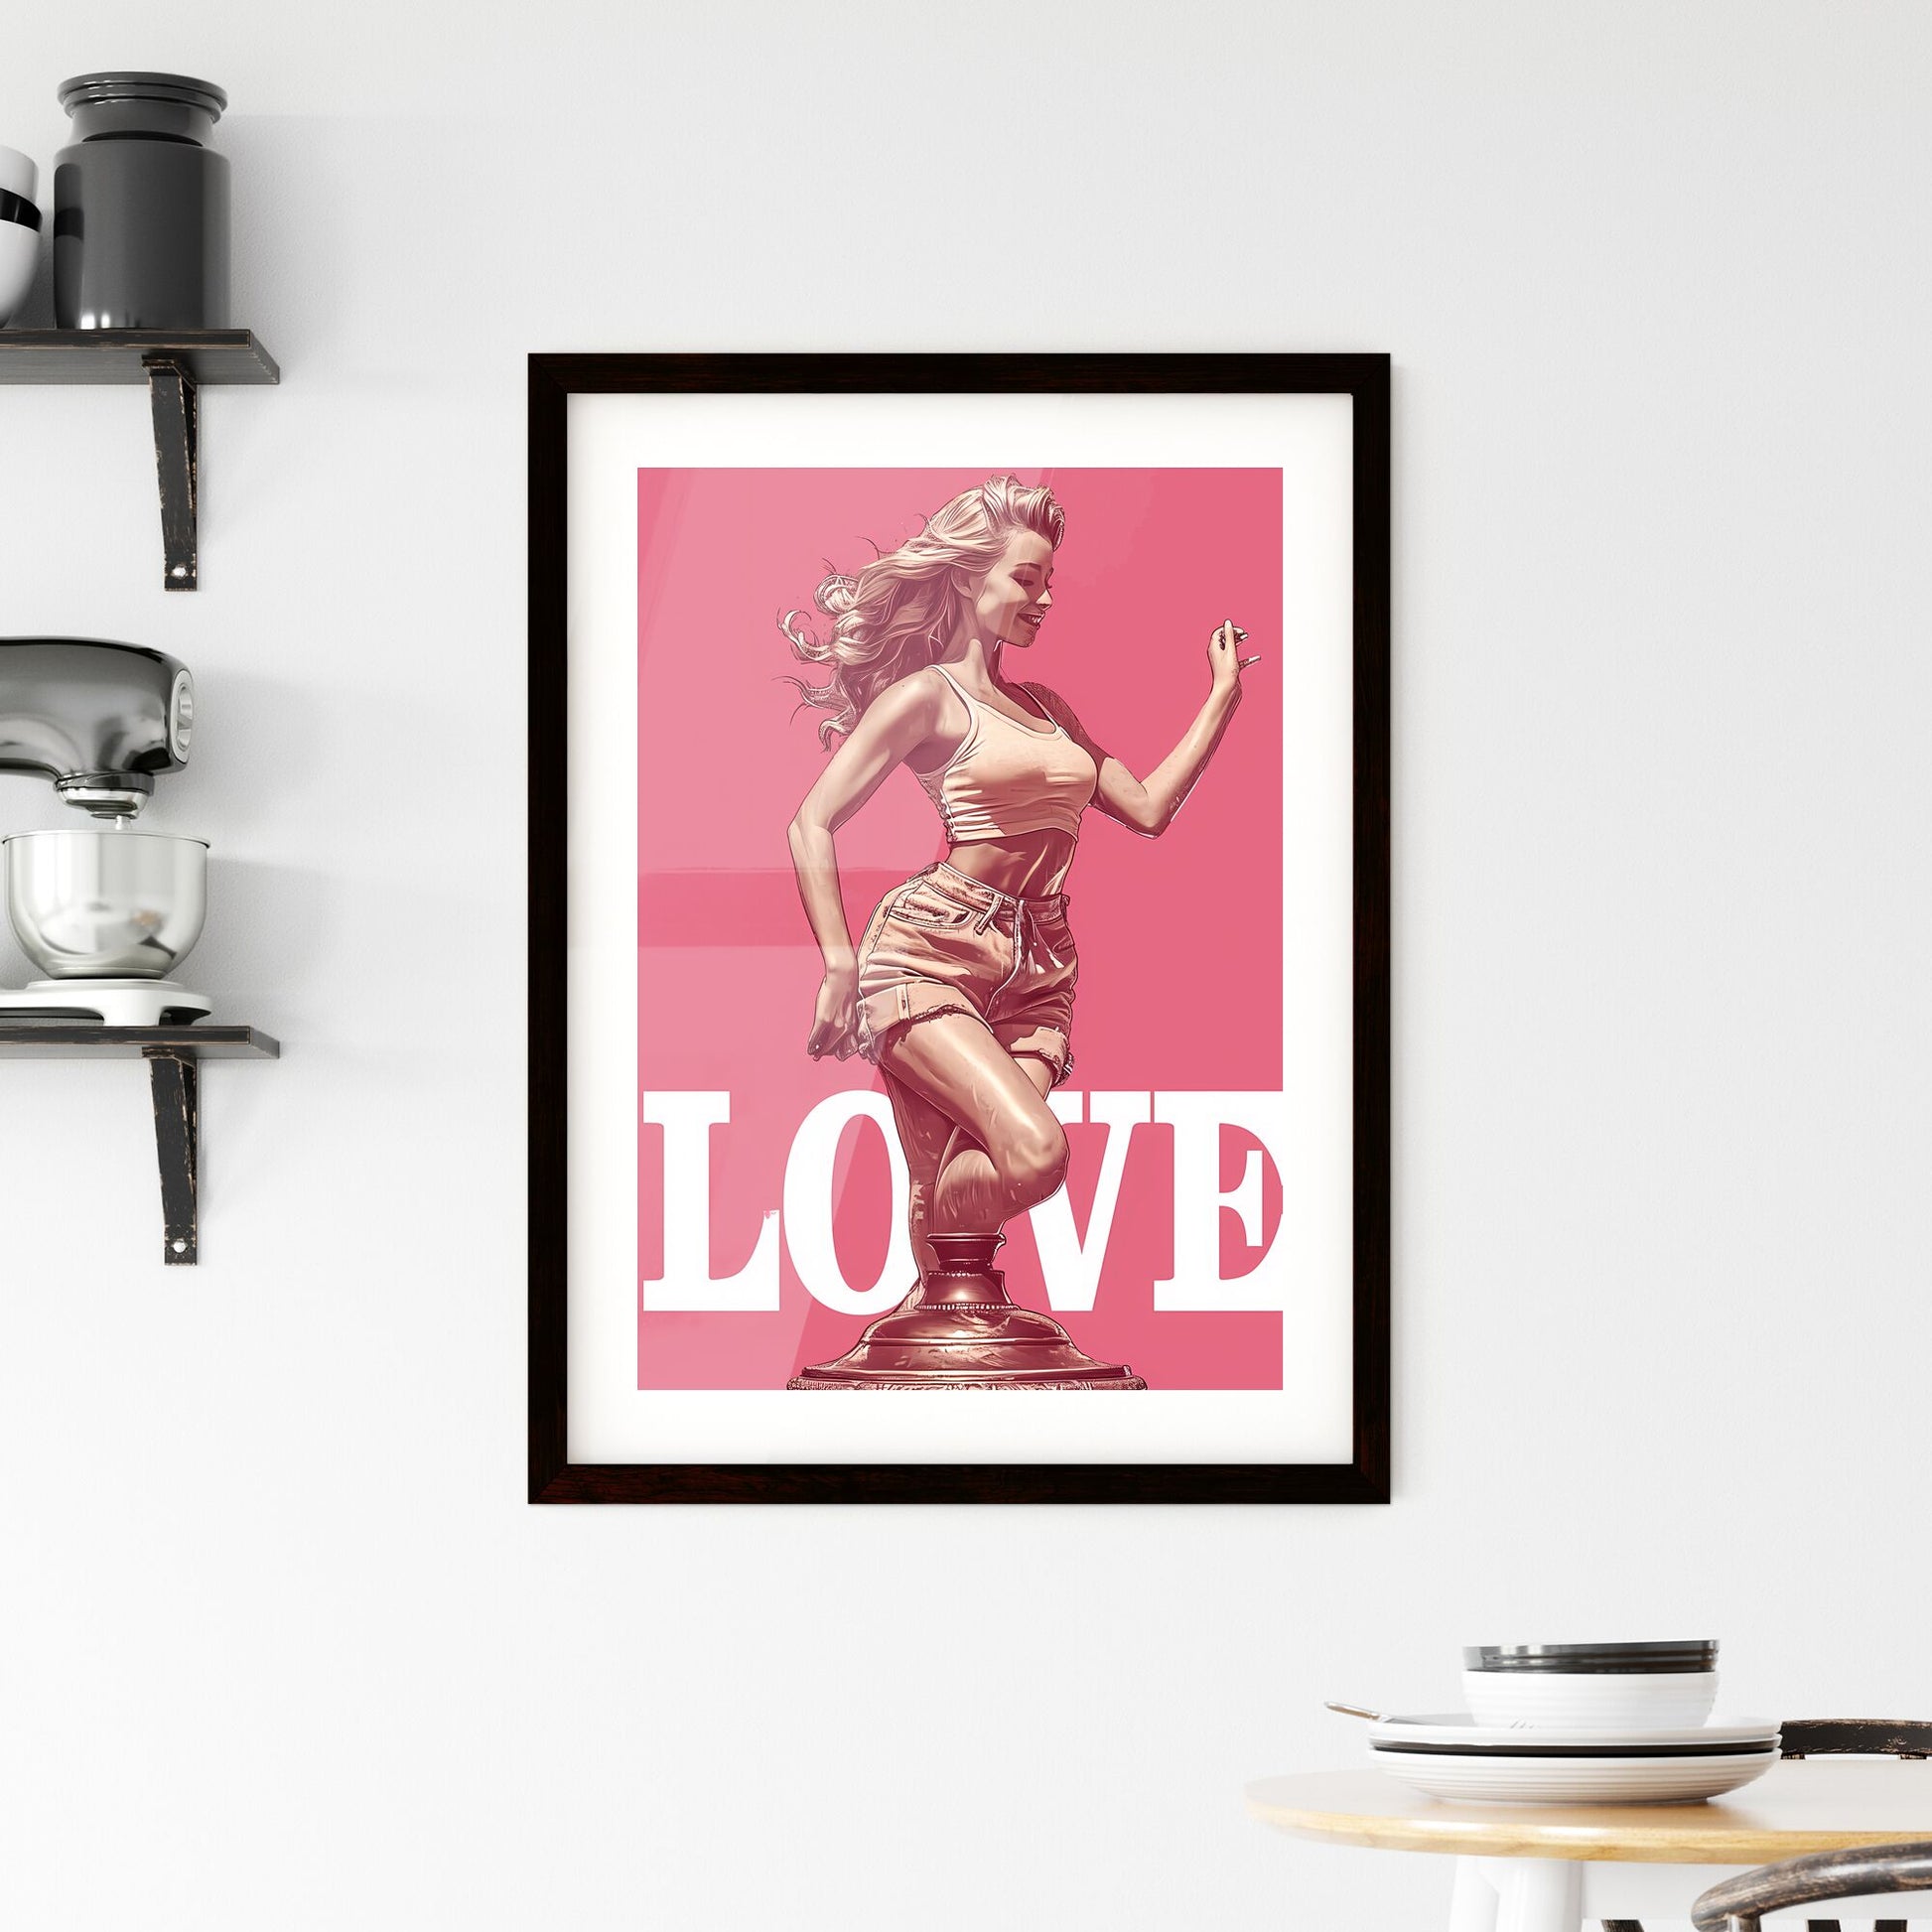 LOVE isolated - Art print of a woman in a dress holding a motorcycle Default Title